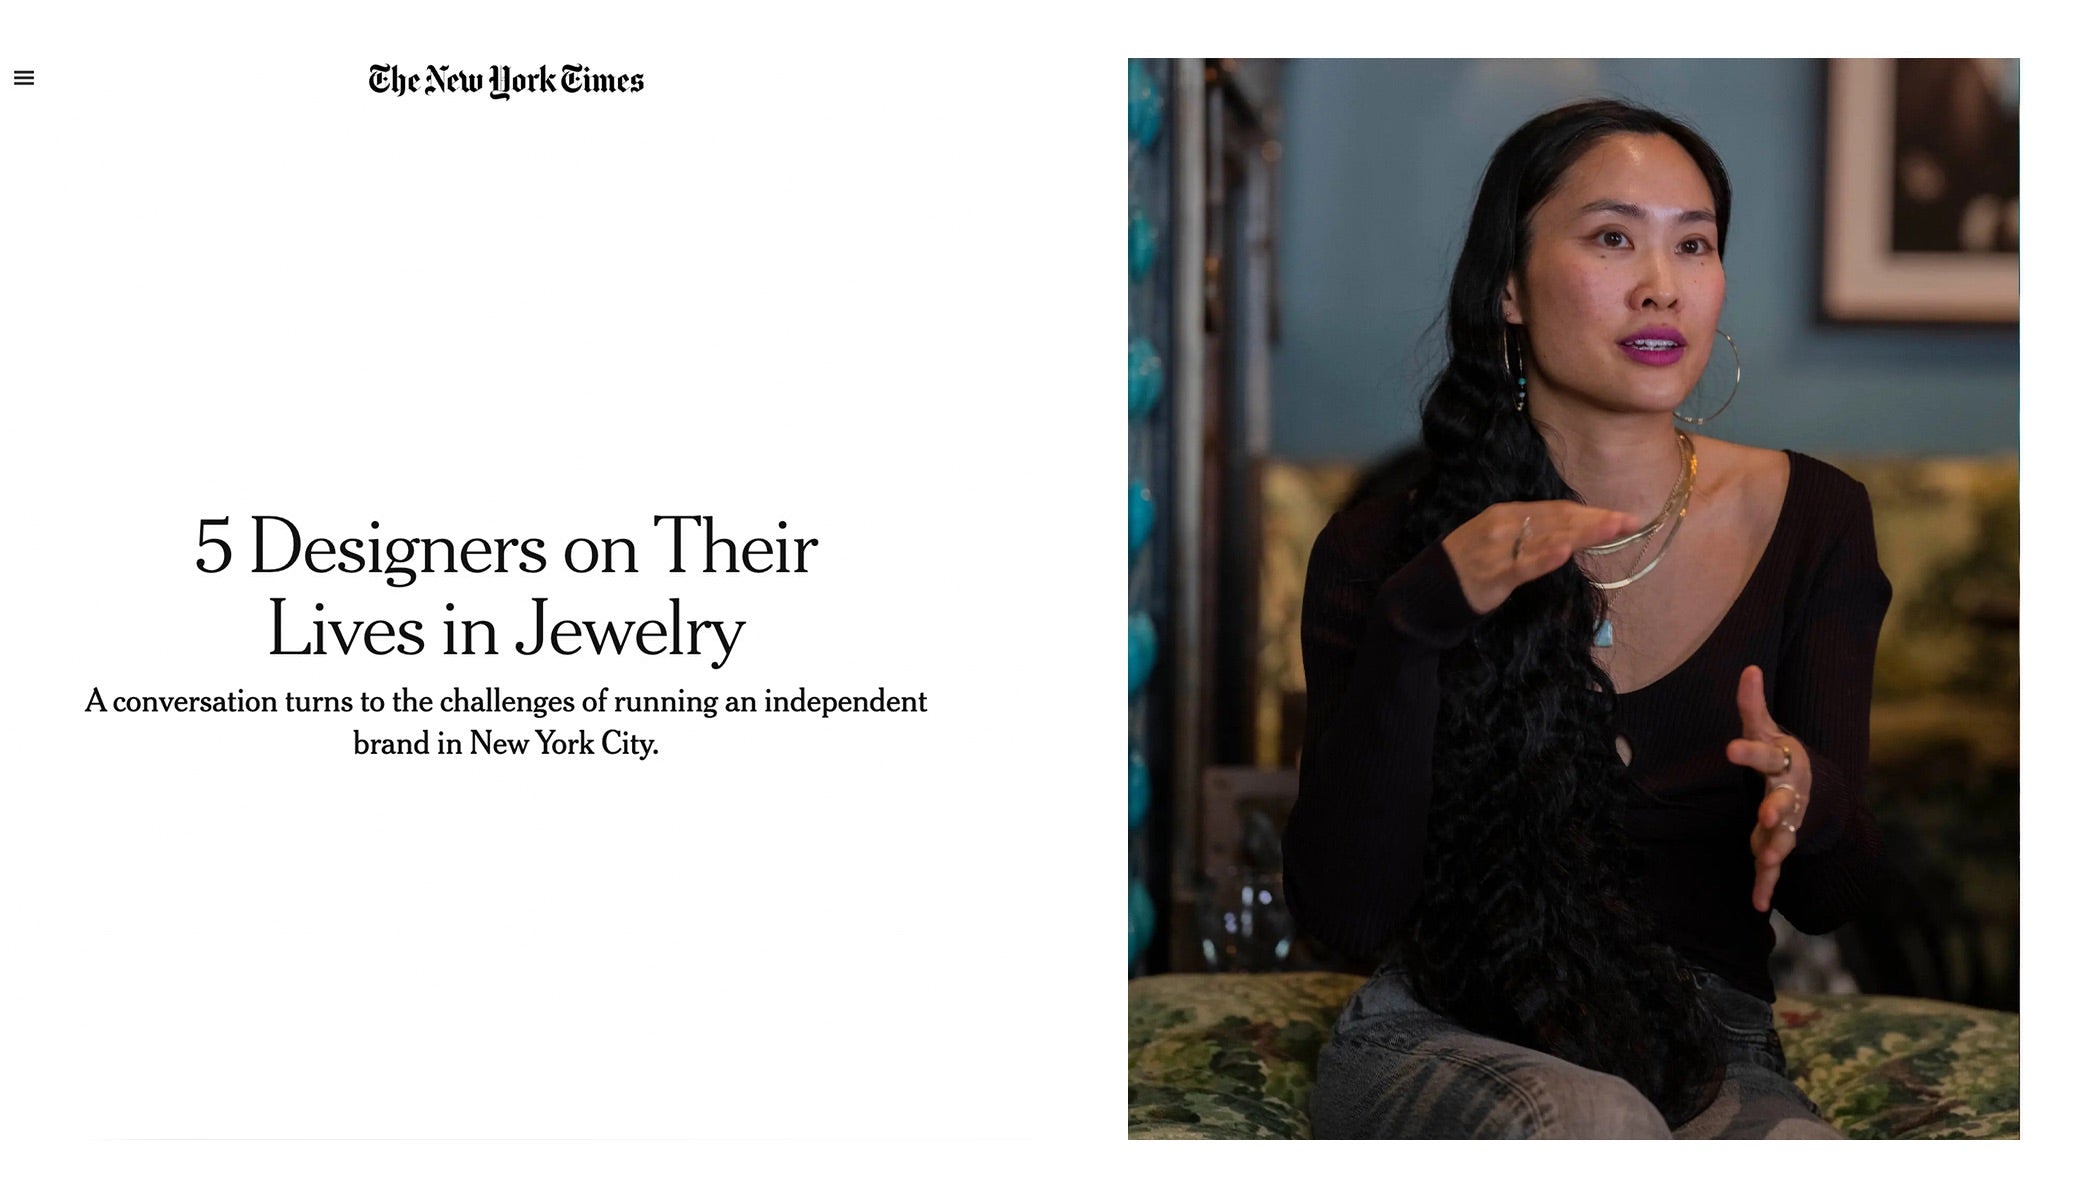 The New York Times | 5 Designers on Their Lives in Jewelry | Rachel Felder